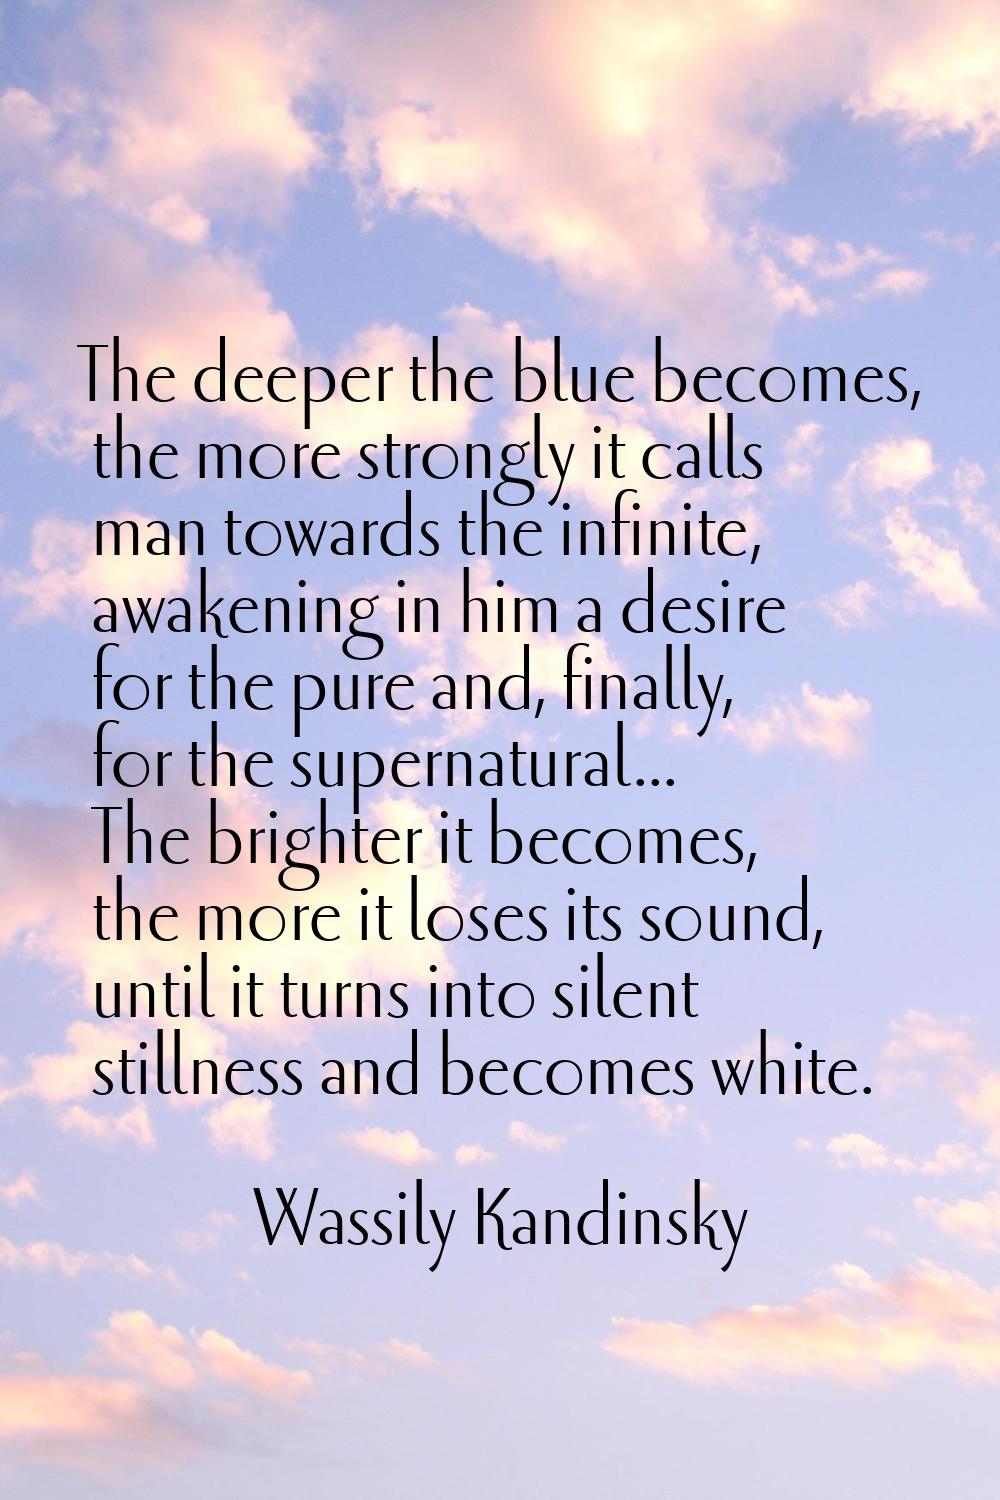 The deeper the blue becomes, the more strongly it calls man towards the infinite, awakening in him 